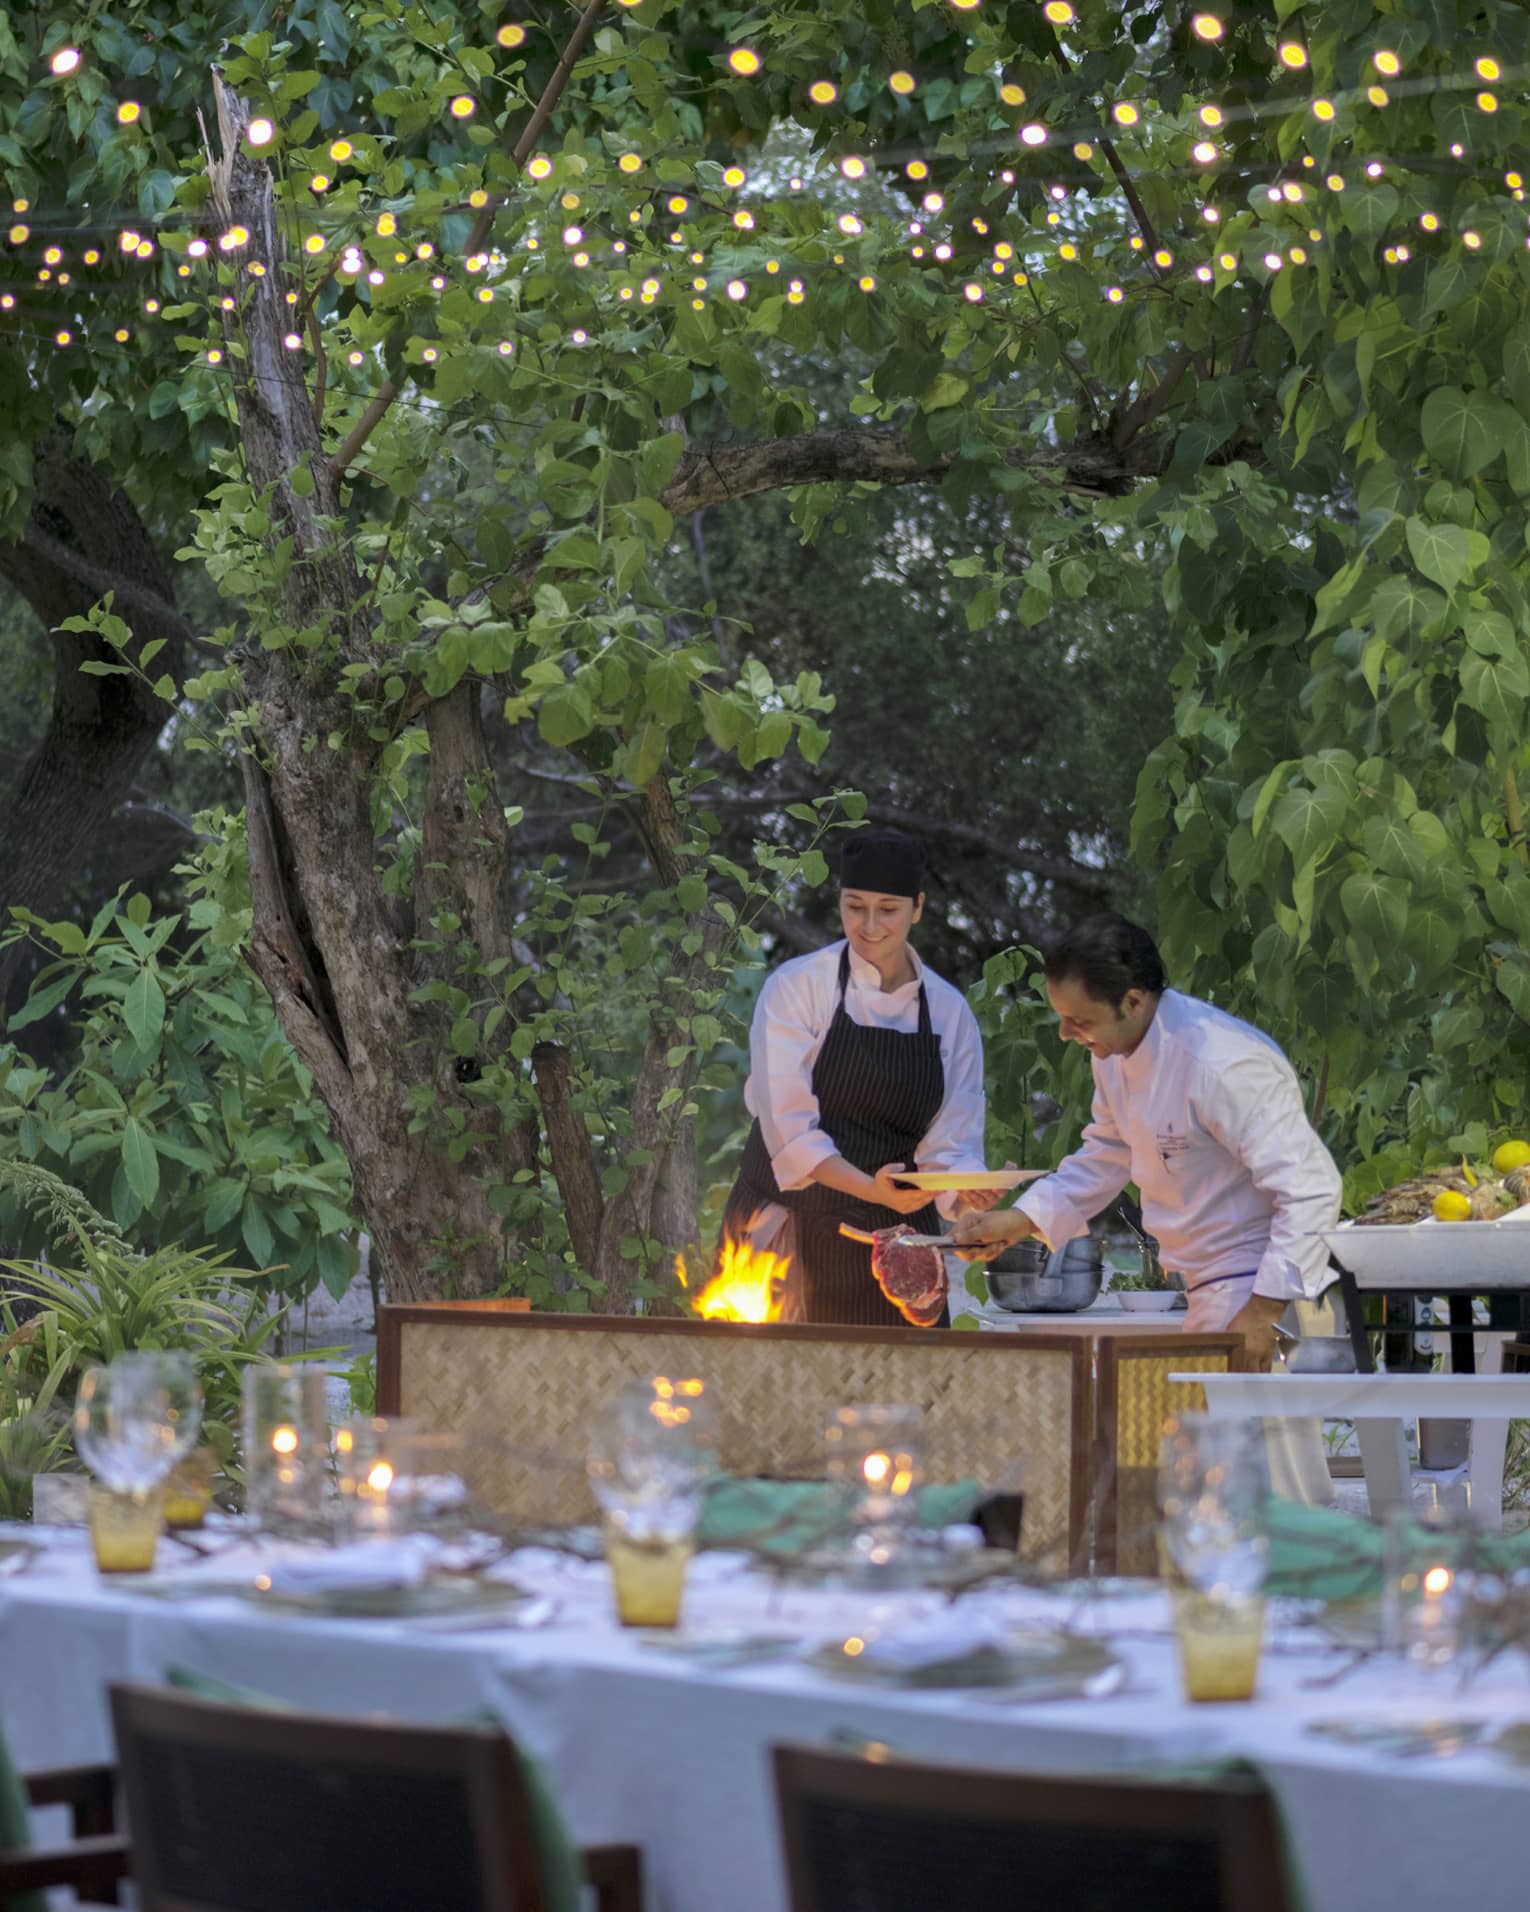 Chefs put large steak on flaming grill by long outdoor dining table, patio lights at night